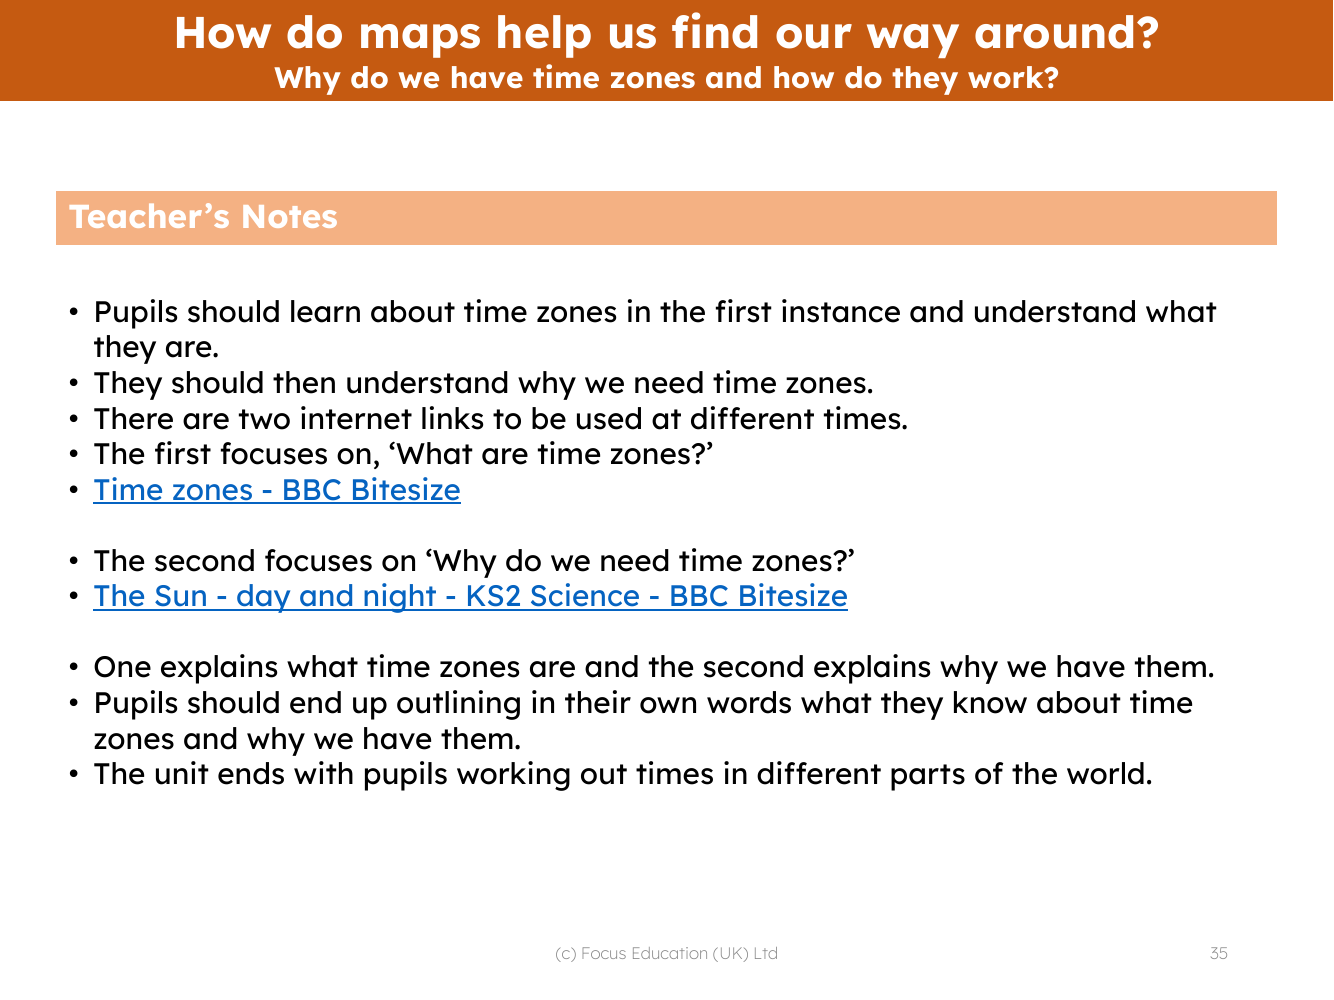 Why do we have time zones and how do they work? - Teacher notes